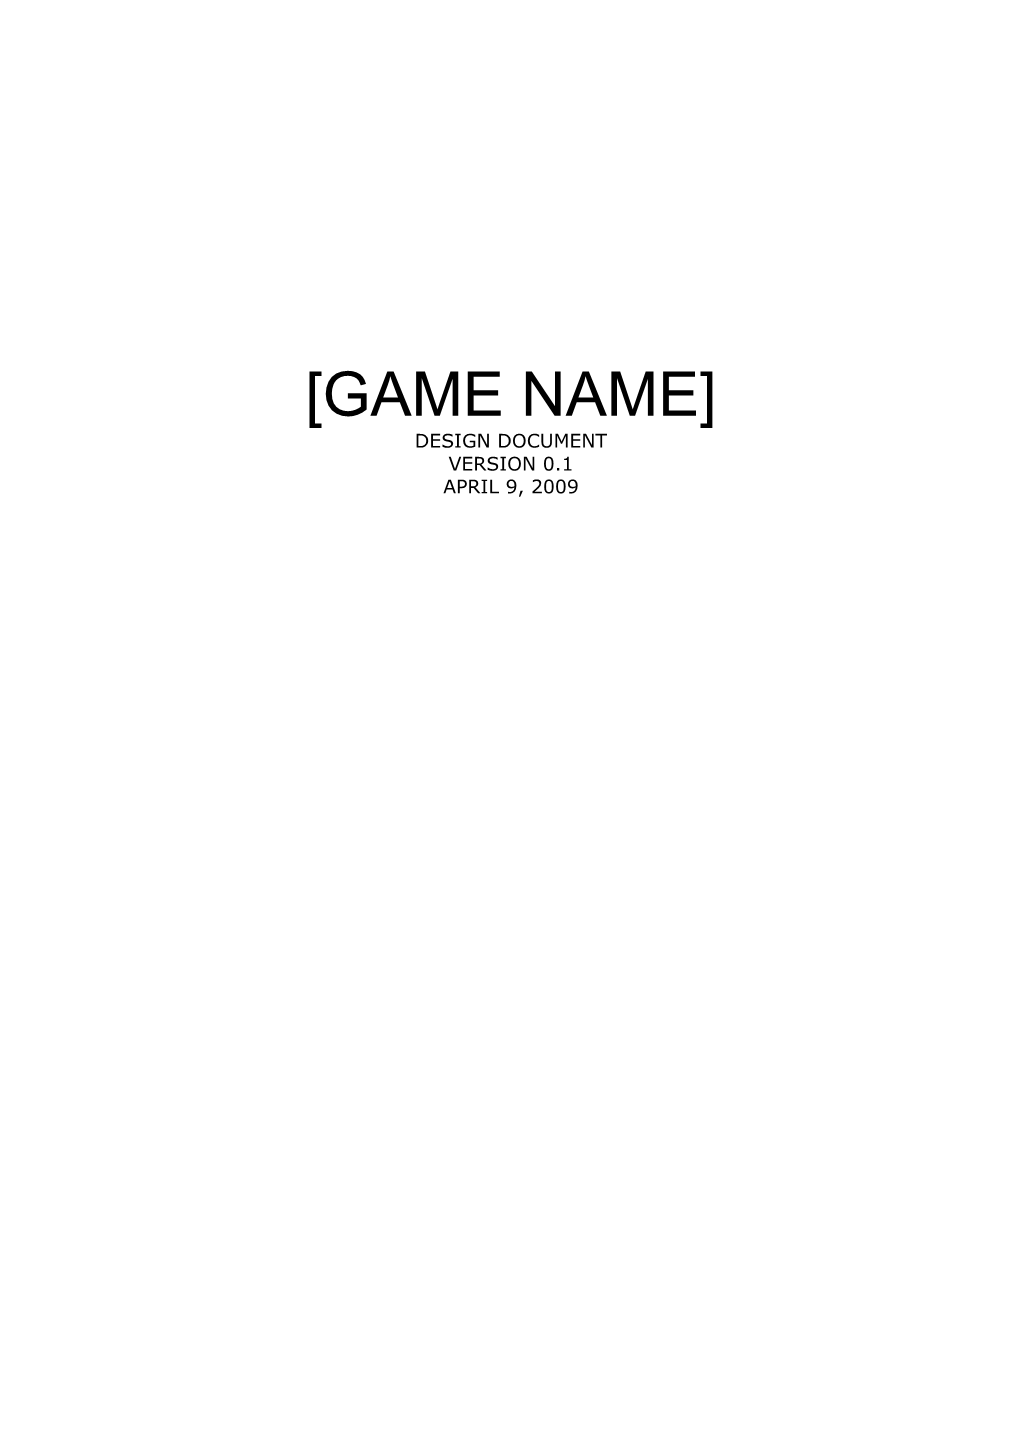 Game Name Design Document1 of 19